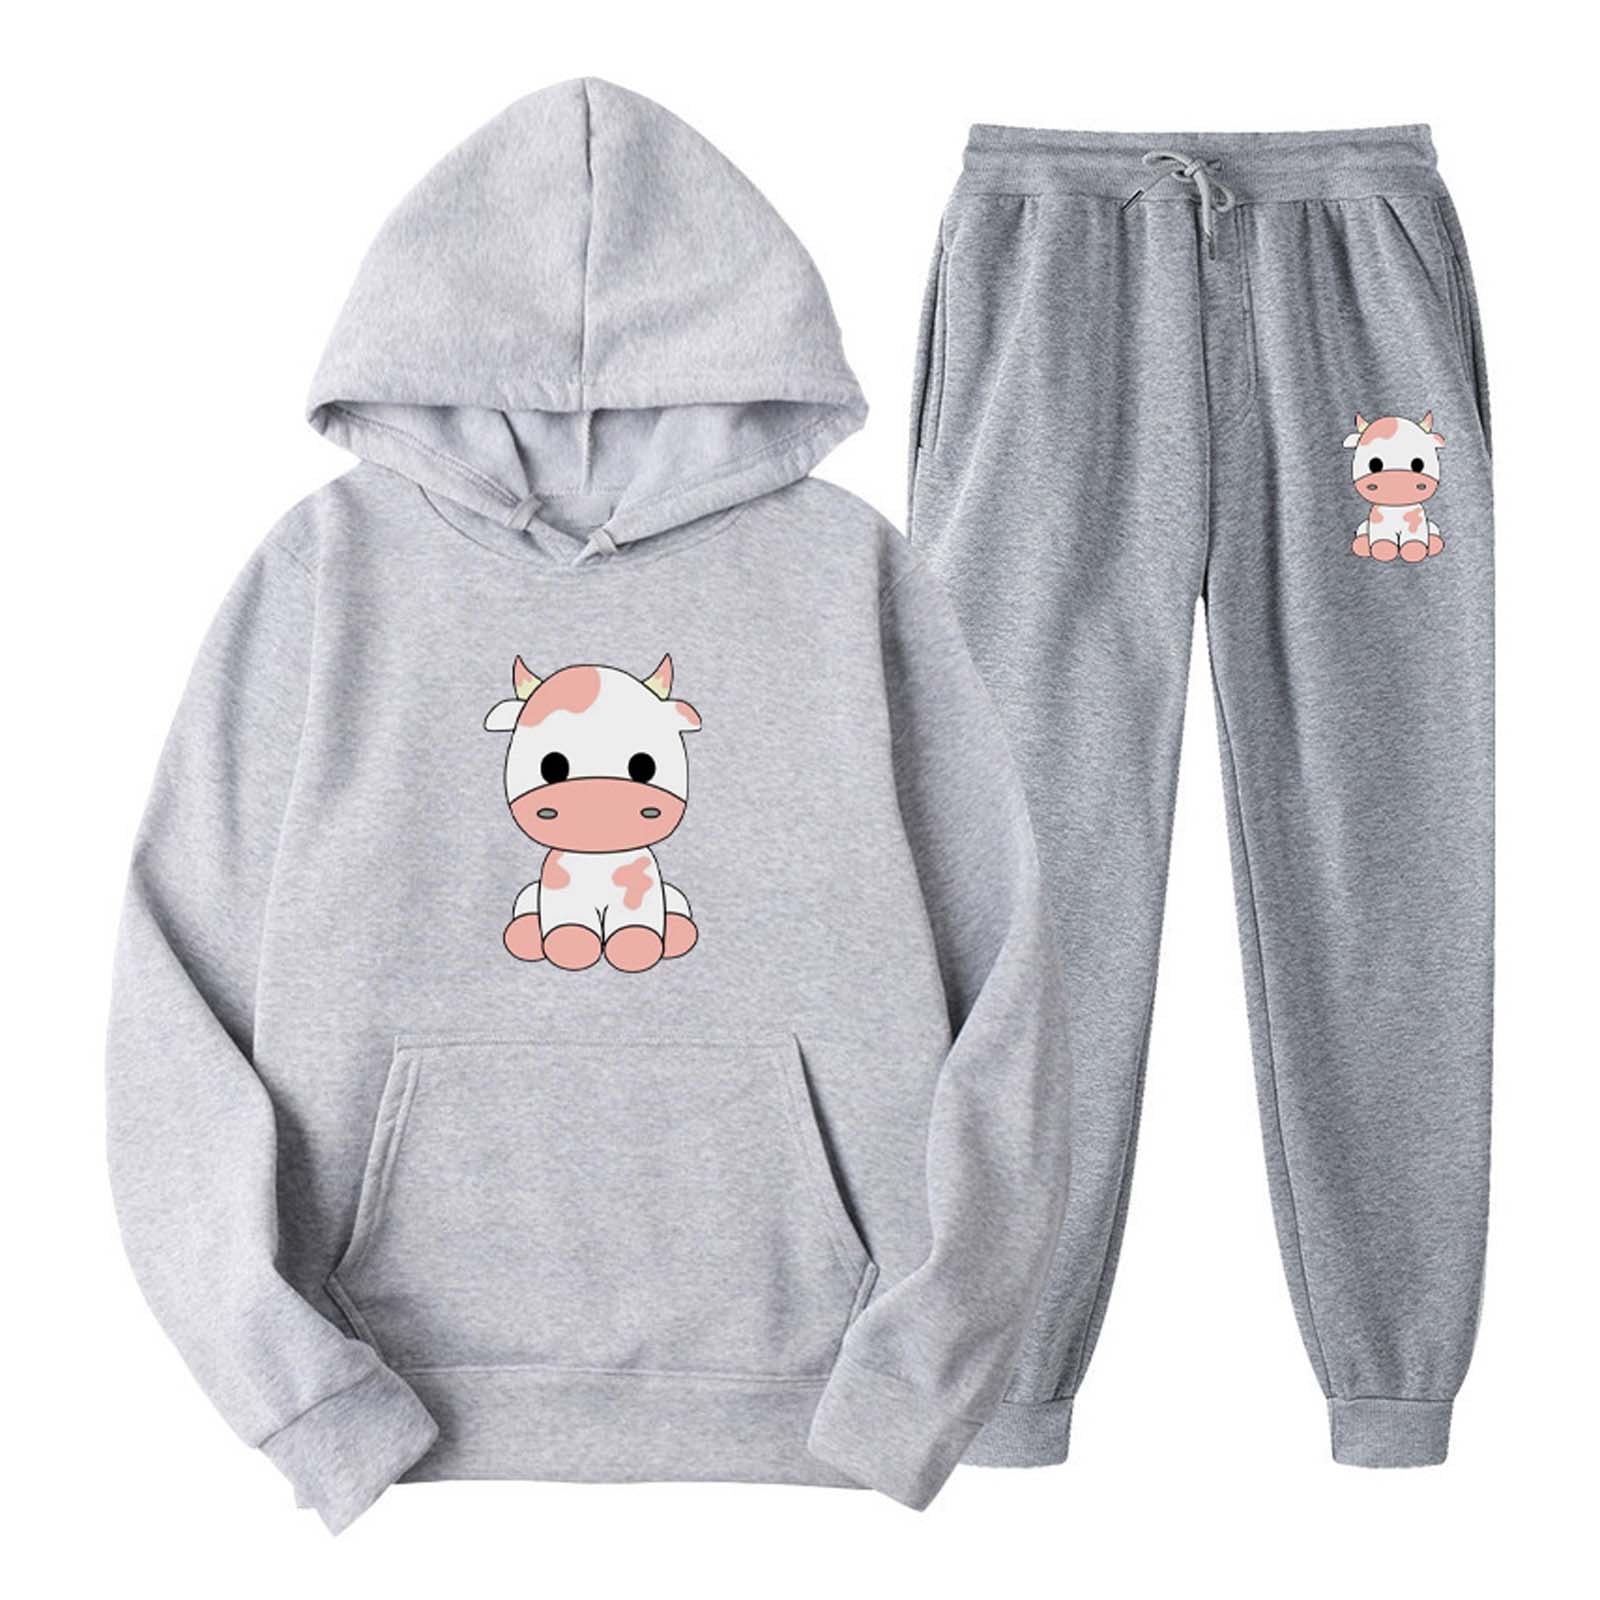 RQYYD Reduced Women 2 Piece Outfits Sets Cute Cow Print Long Sleeve Hooded  Sweatshirts Matching Joggers Sweatpants Gym Outfits with Pocket Gray L 